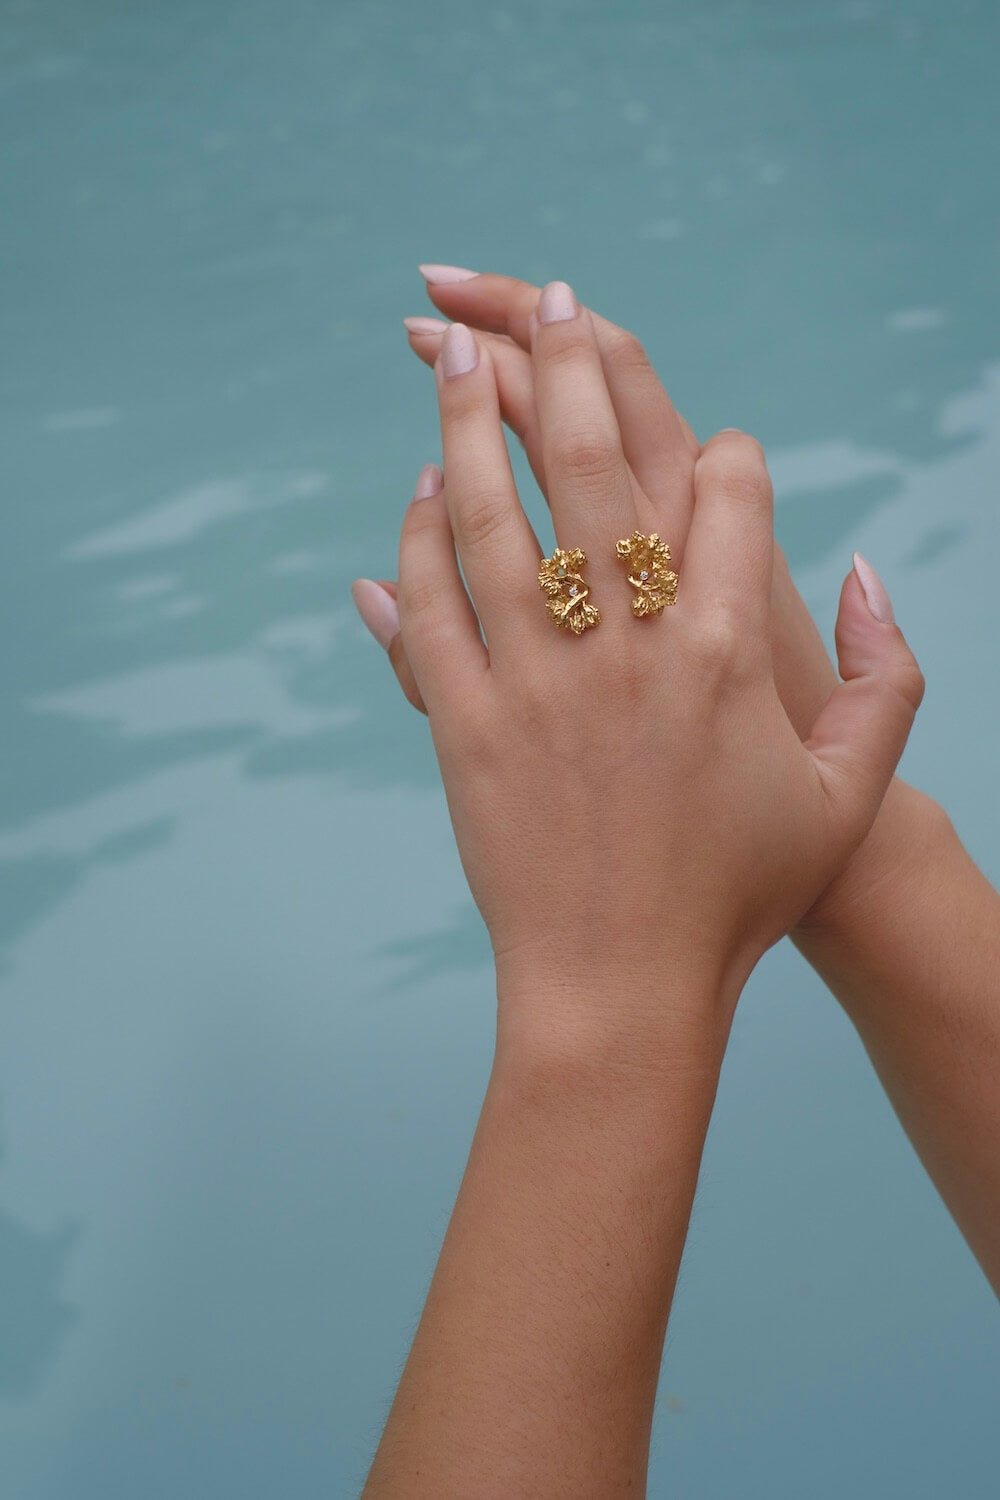 A woman's hand adorned with the Cremilde Bispo Jewellery Garden Ring GP, in gold plated Sterling Silver, featuring natural Quartz gemstones.